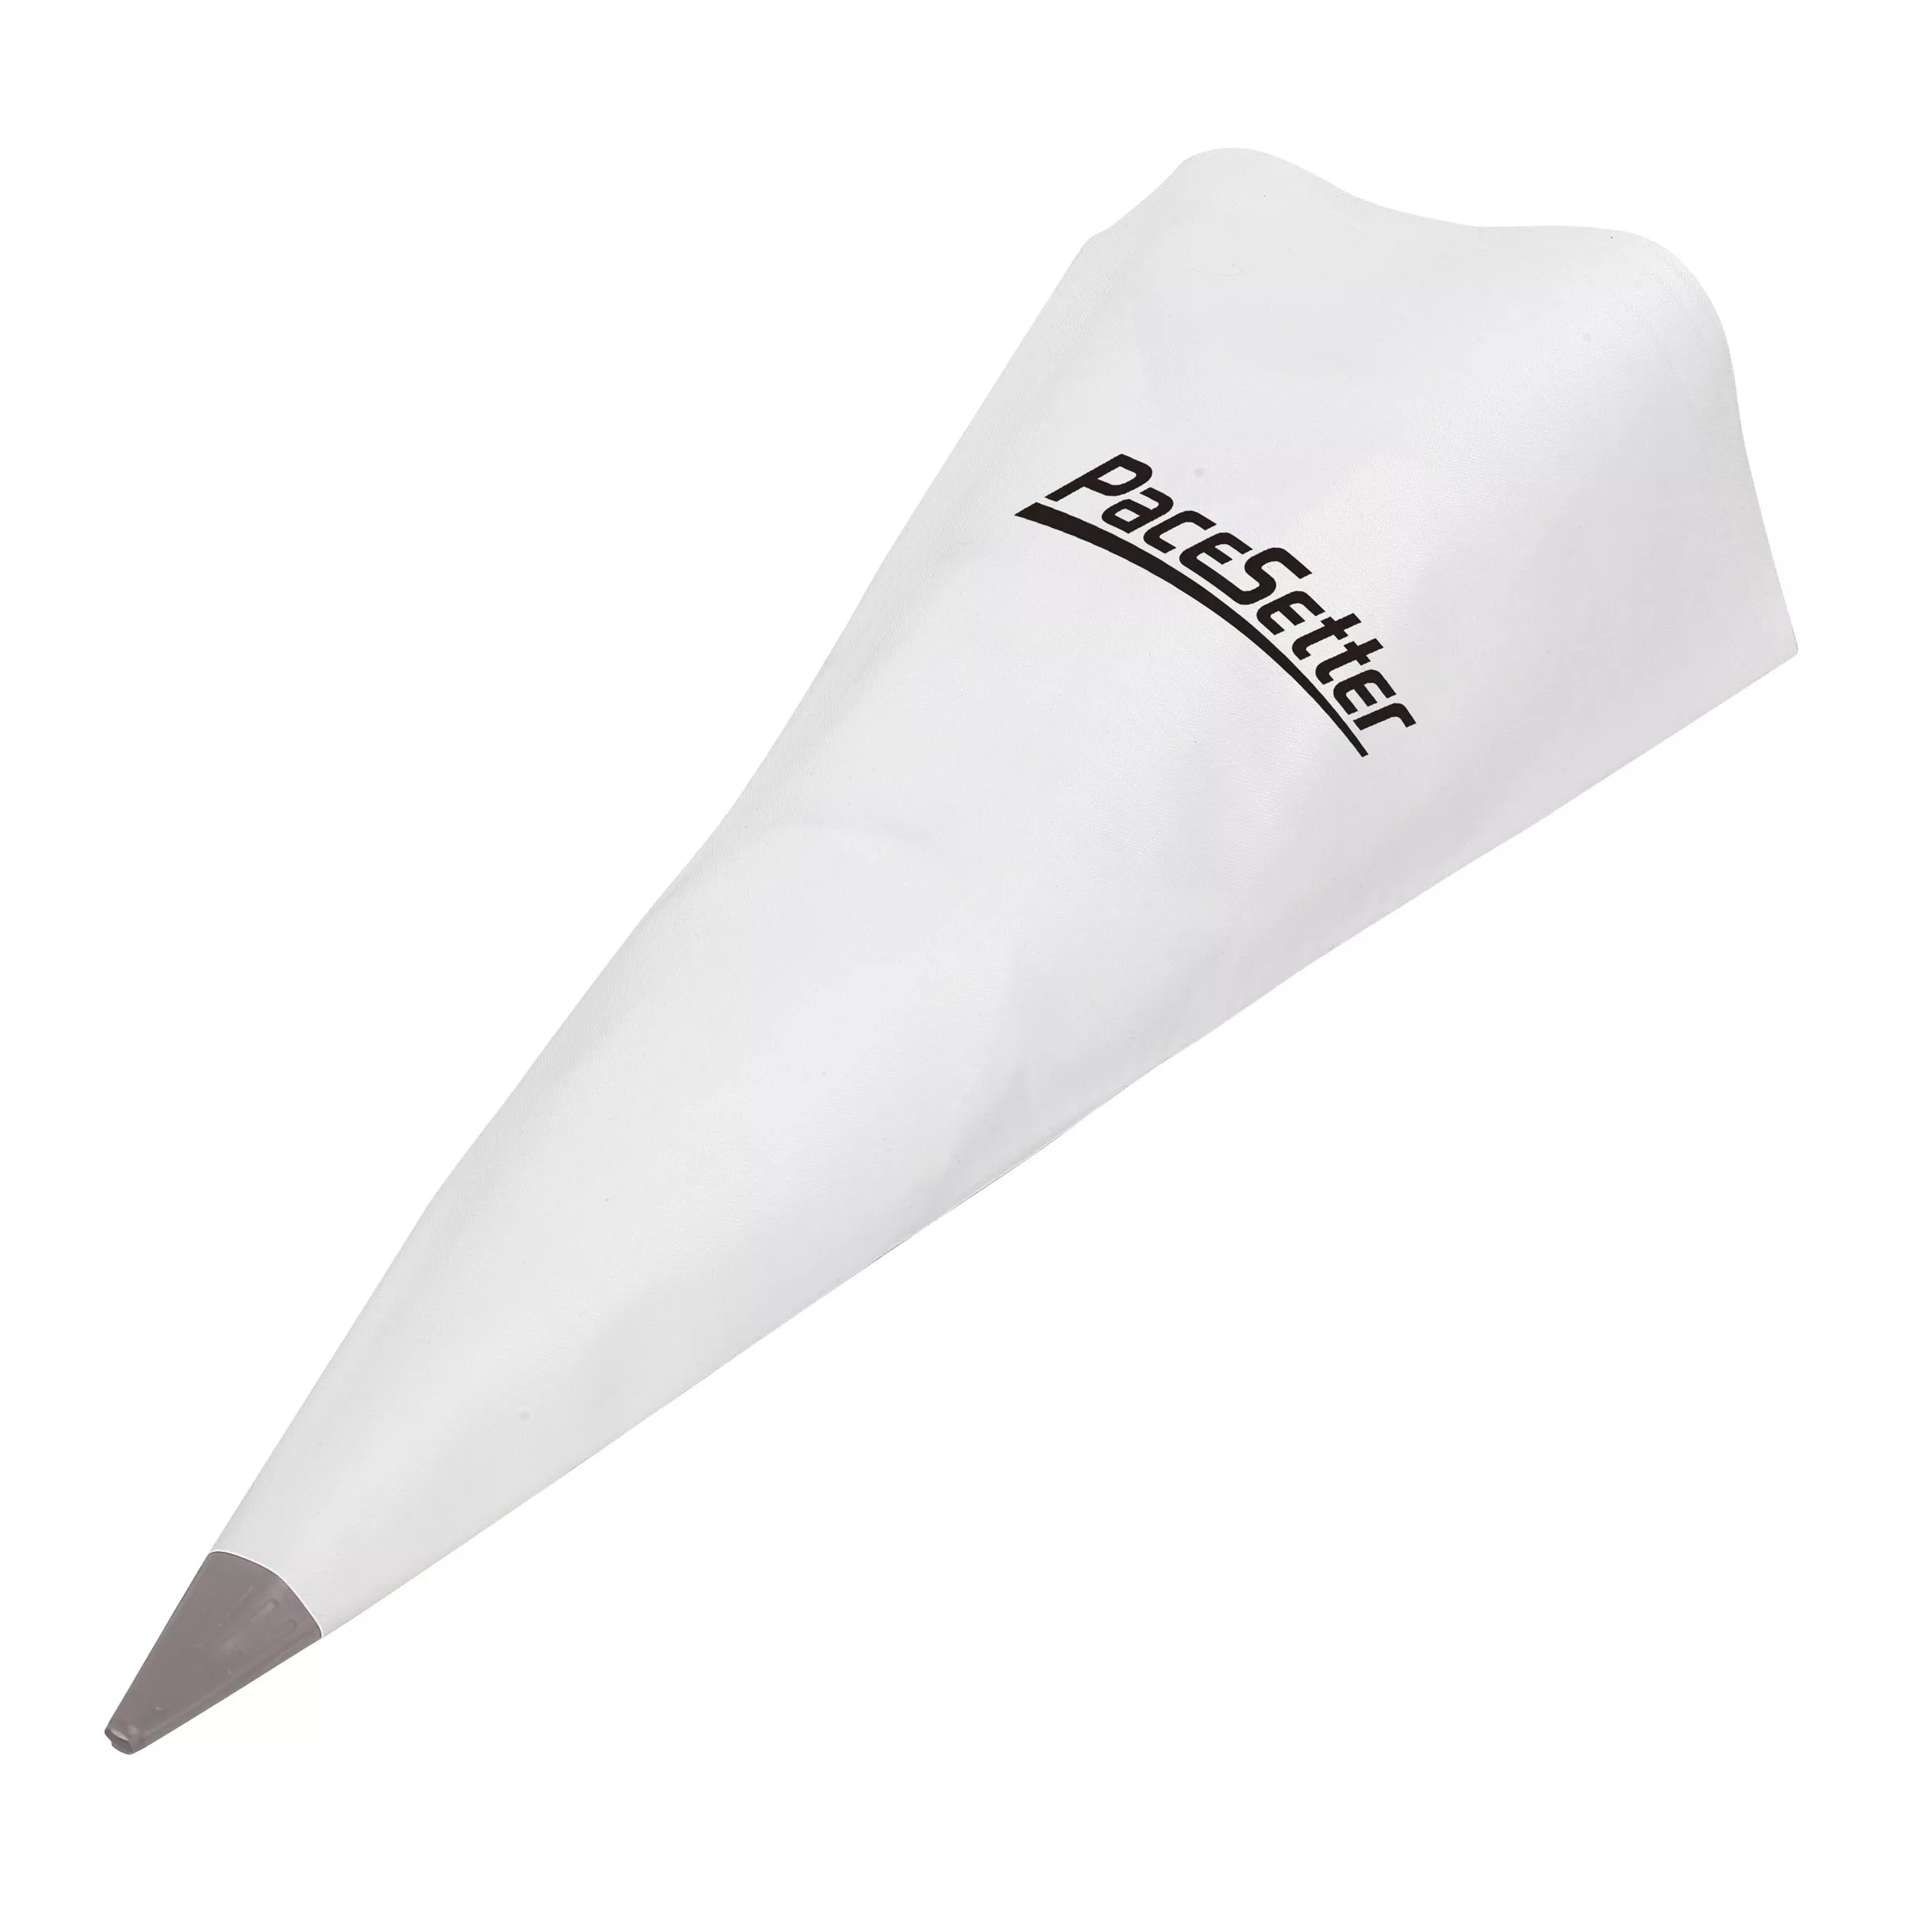 Pacesetter Grout Bag with Plastic Tip